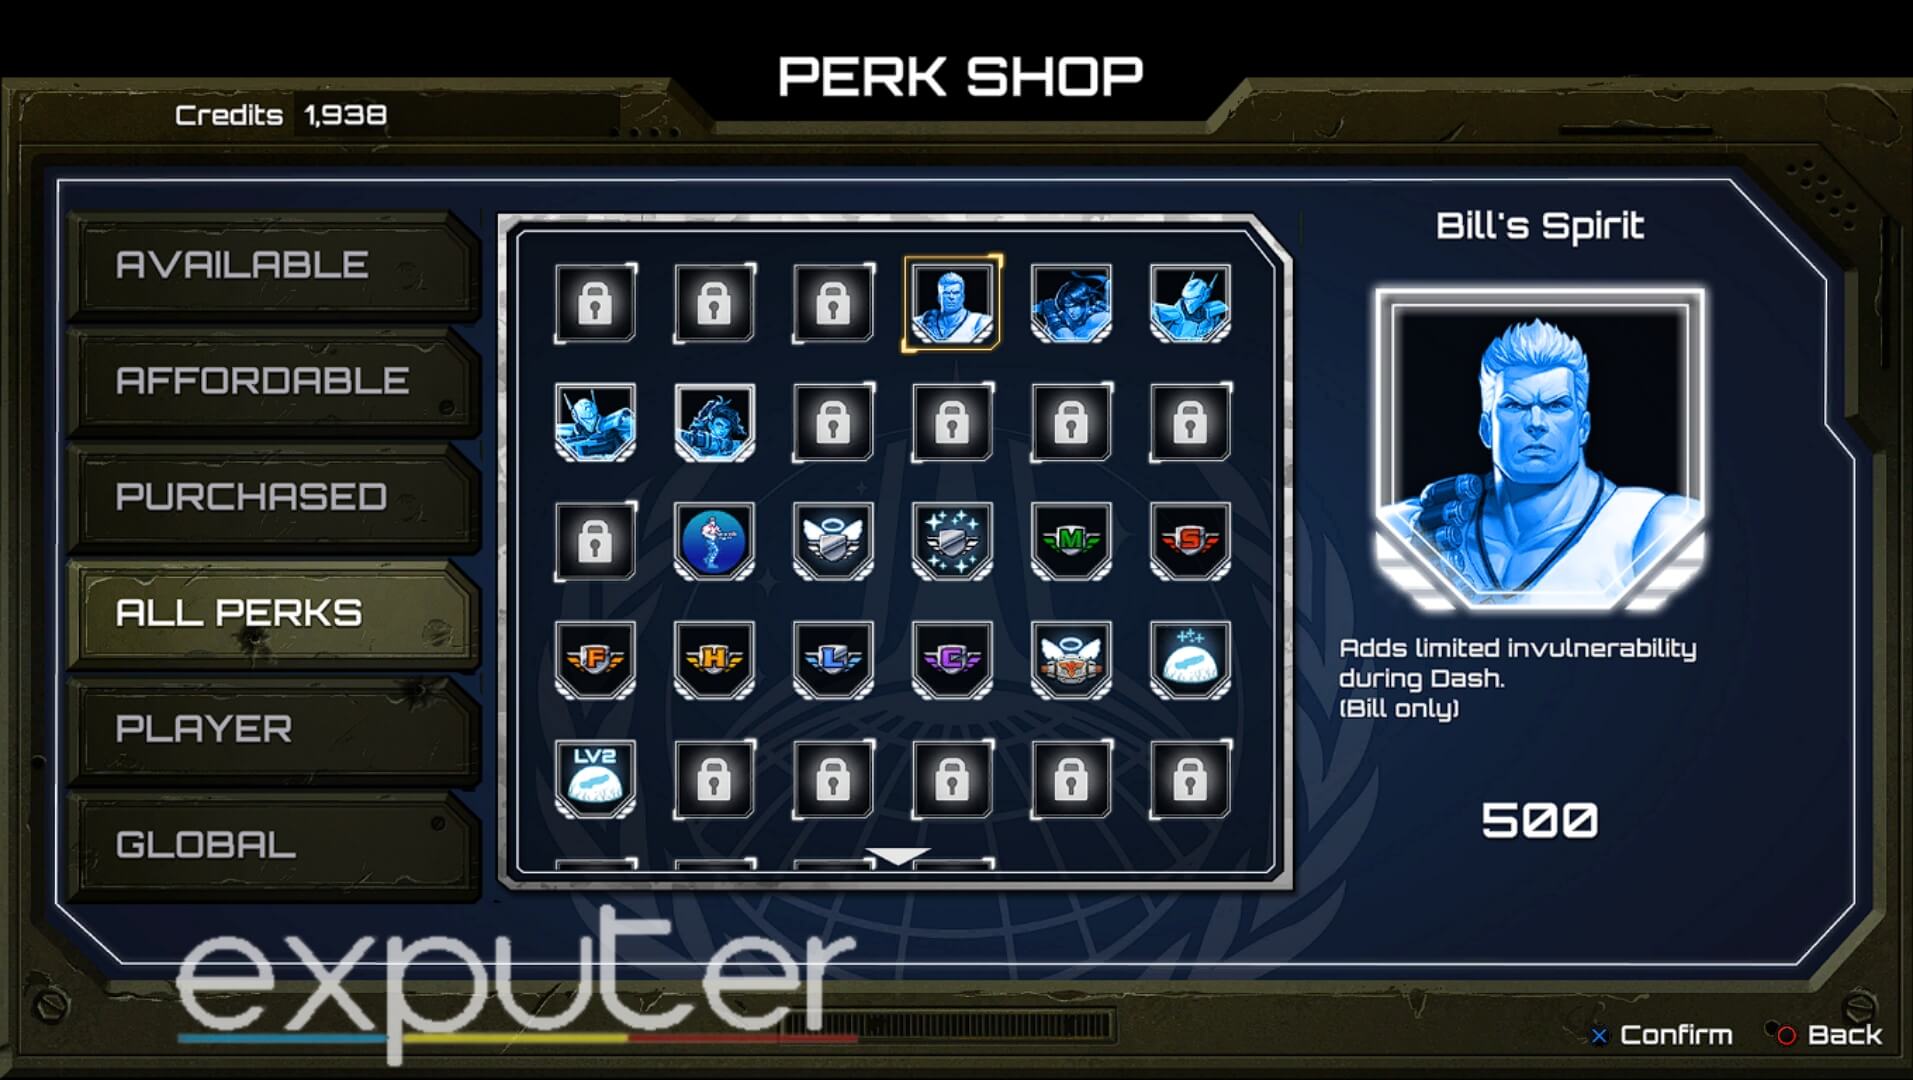 Perks, the auxiliary abilities (image credit: eXputer)